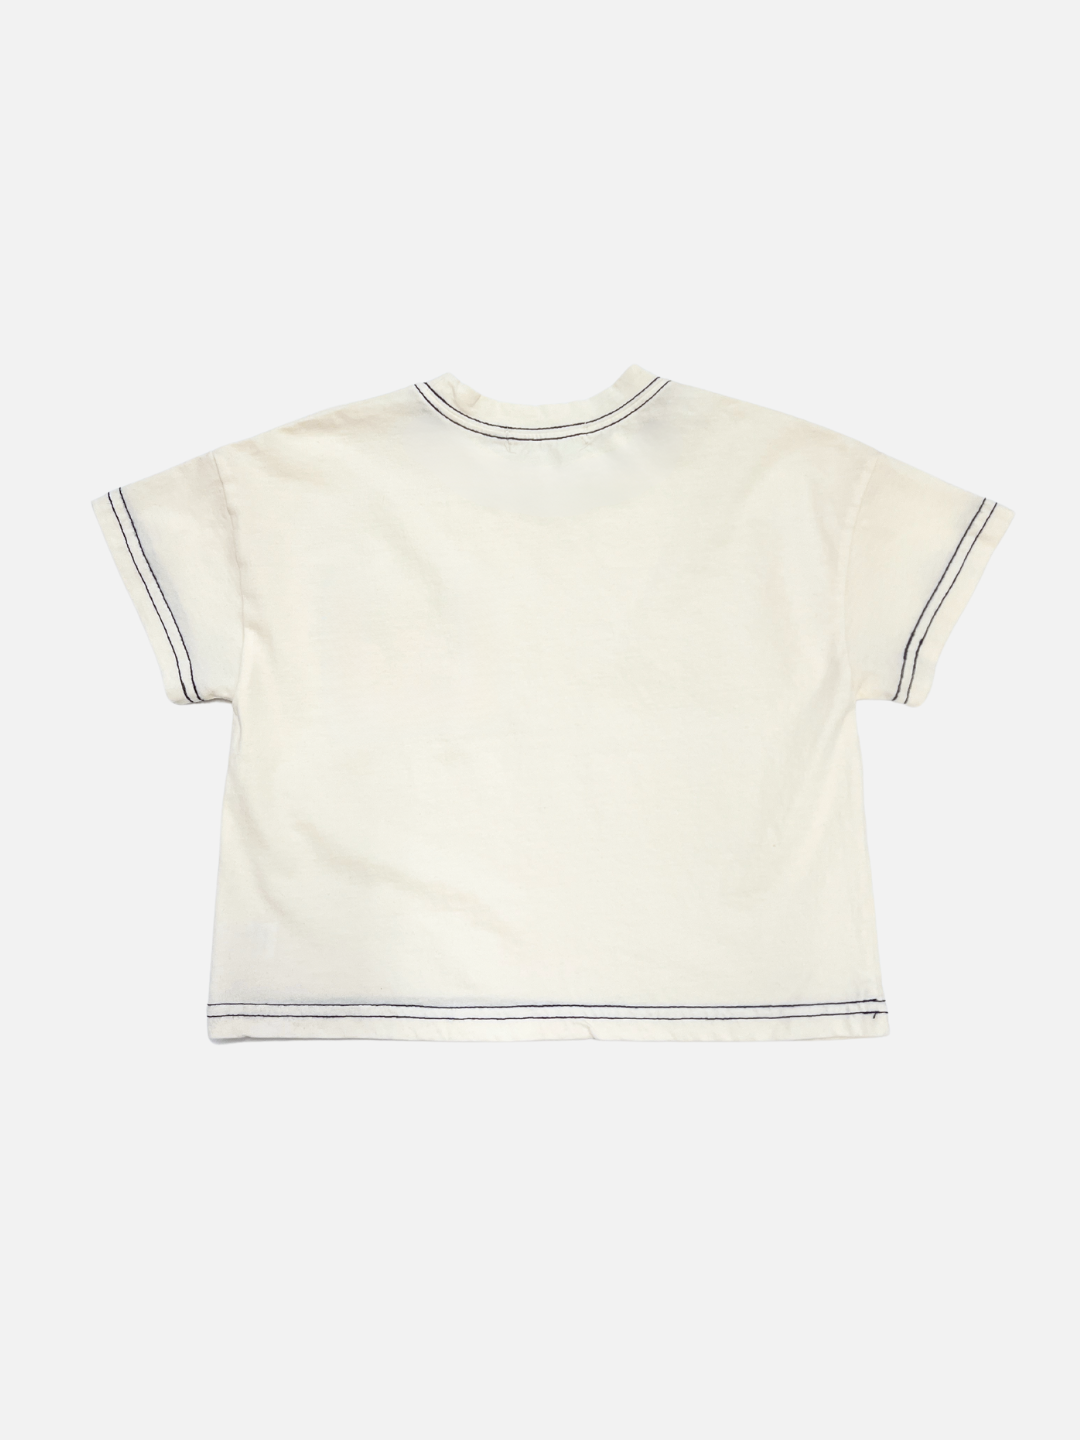 Ivory | Back view of the kids' stitch pocket tee in Ivory feturing contrast black stitch